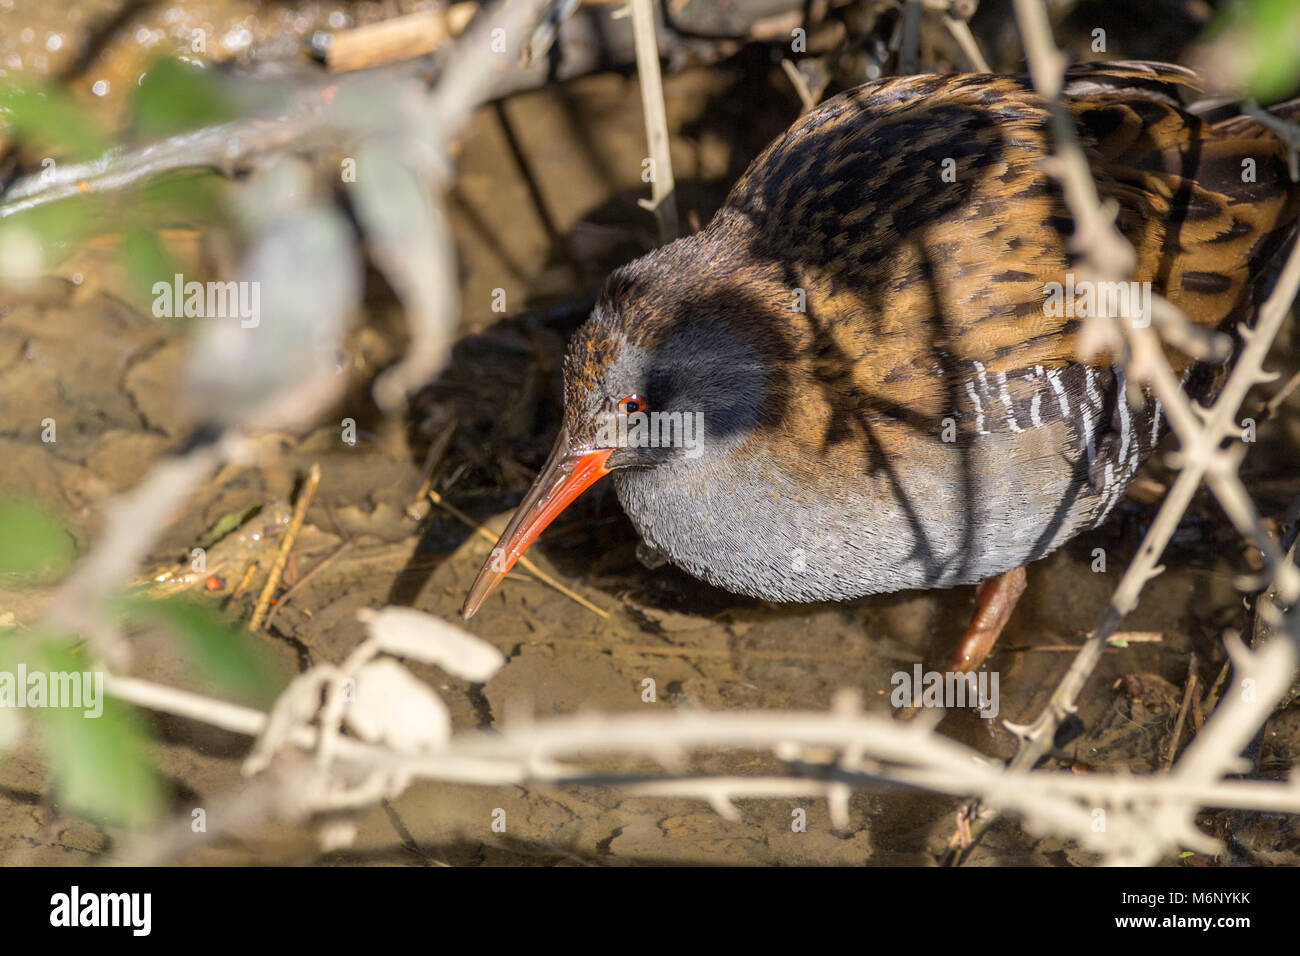 Water rail (Rallus aquaticus)  searching for food in a wet ditch area by a stream at Arundel wetland centre UK. It was mostly undercover in vegetation Stock Photo